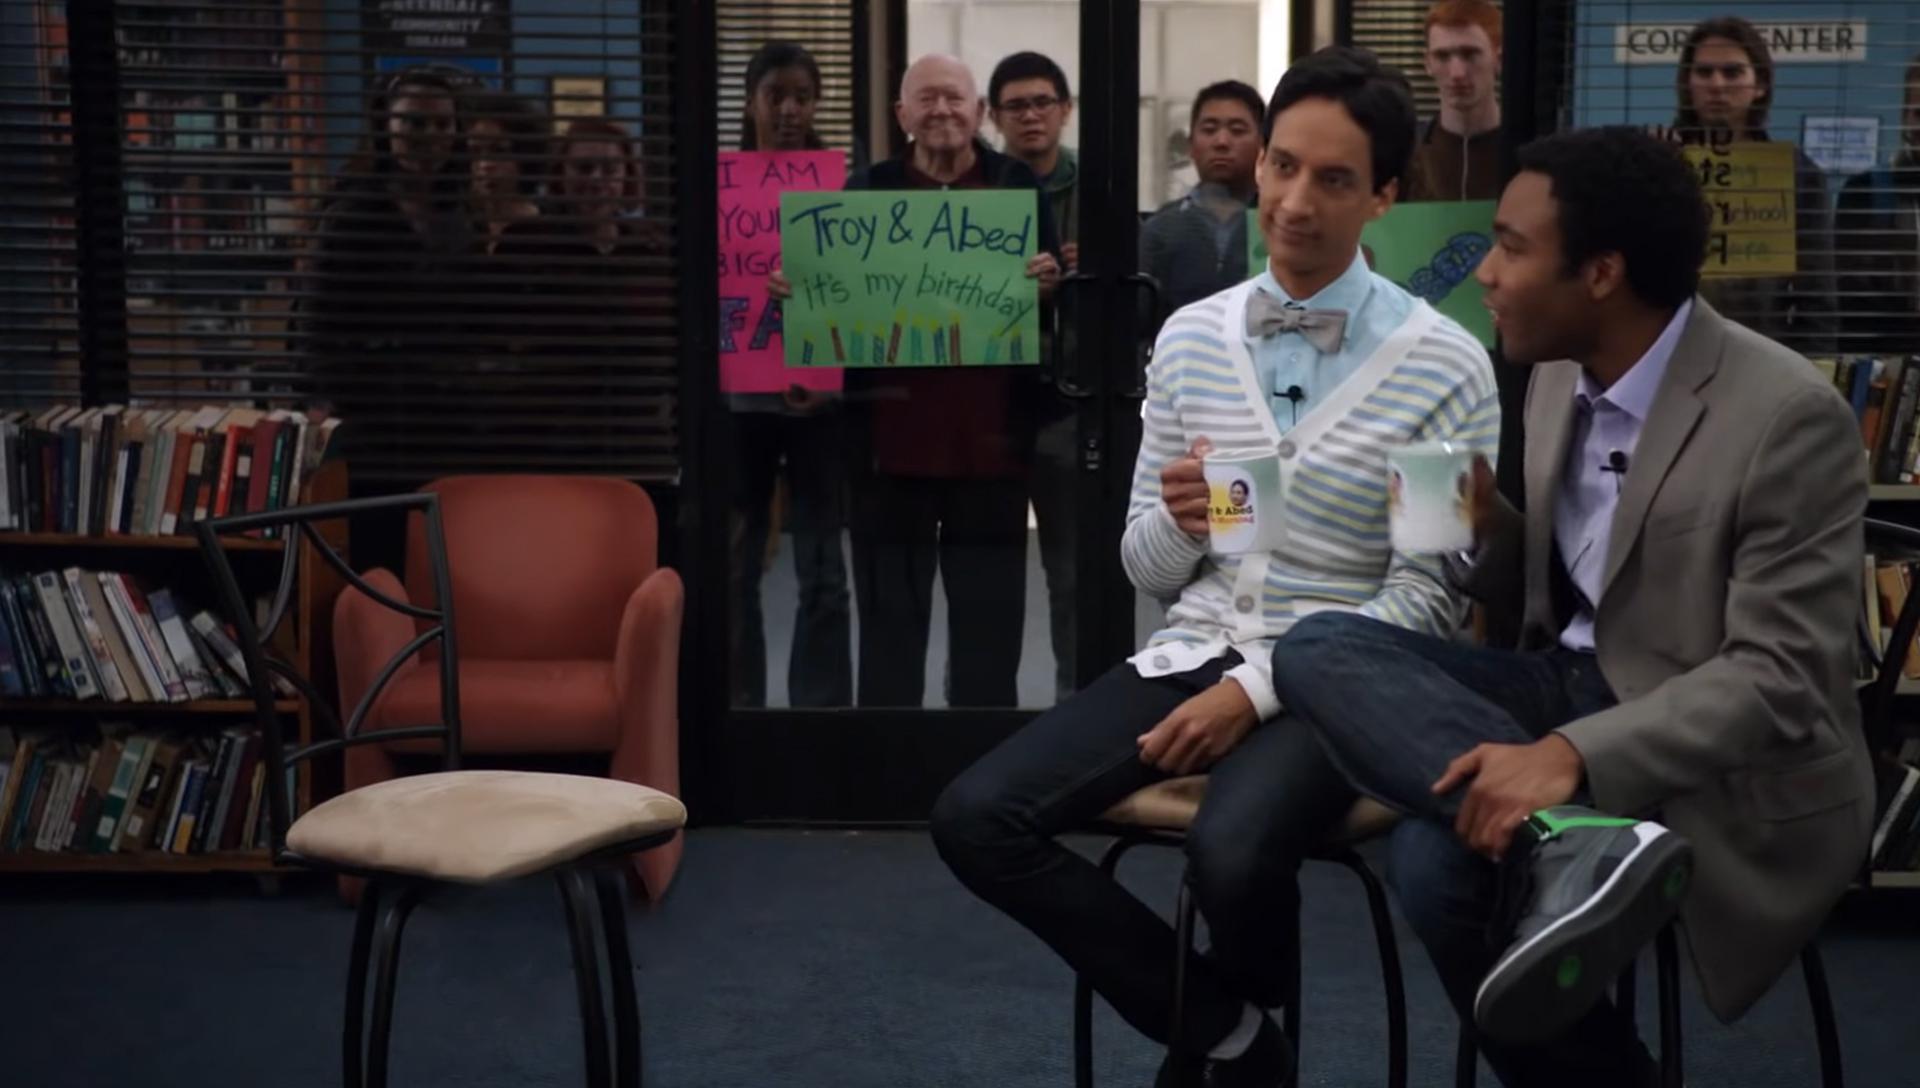 Community - Sit with Troy and Abed